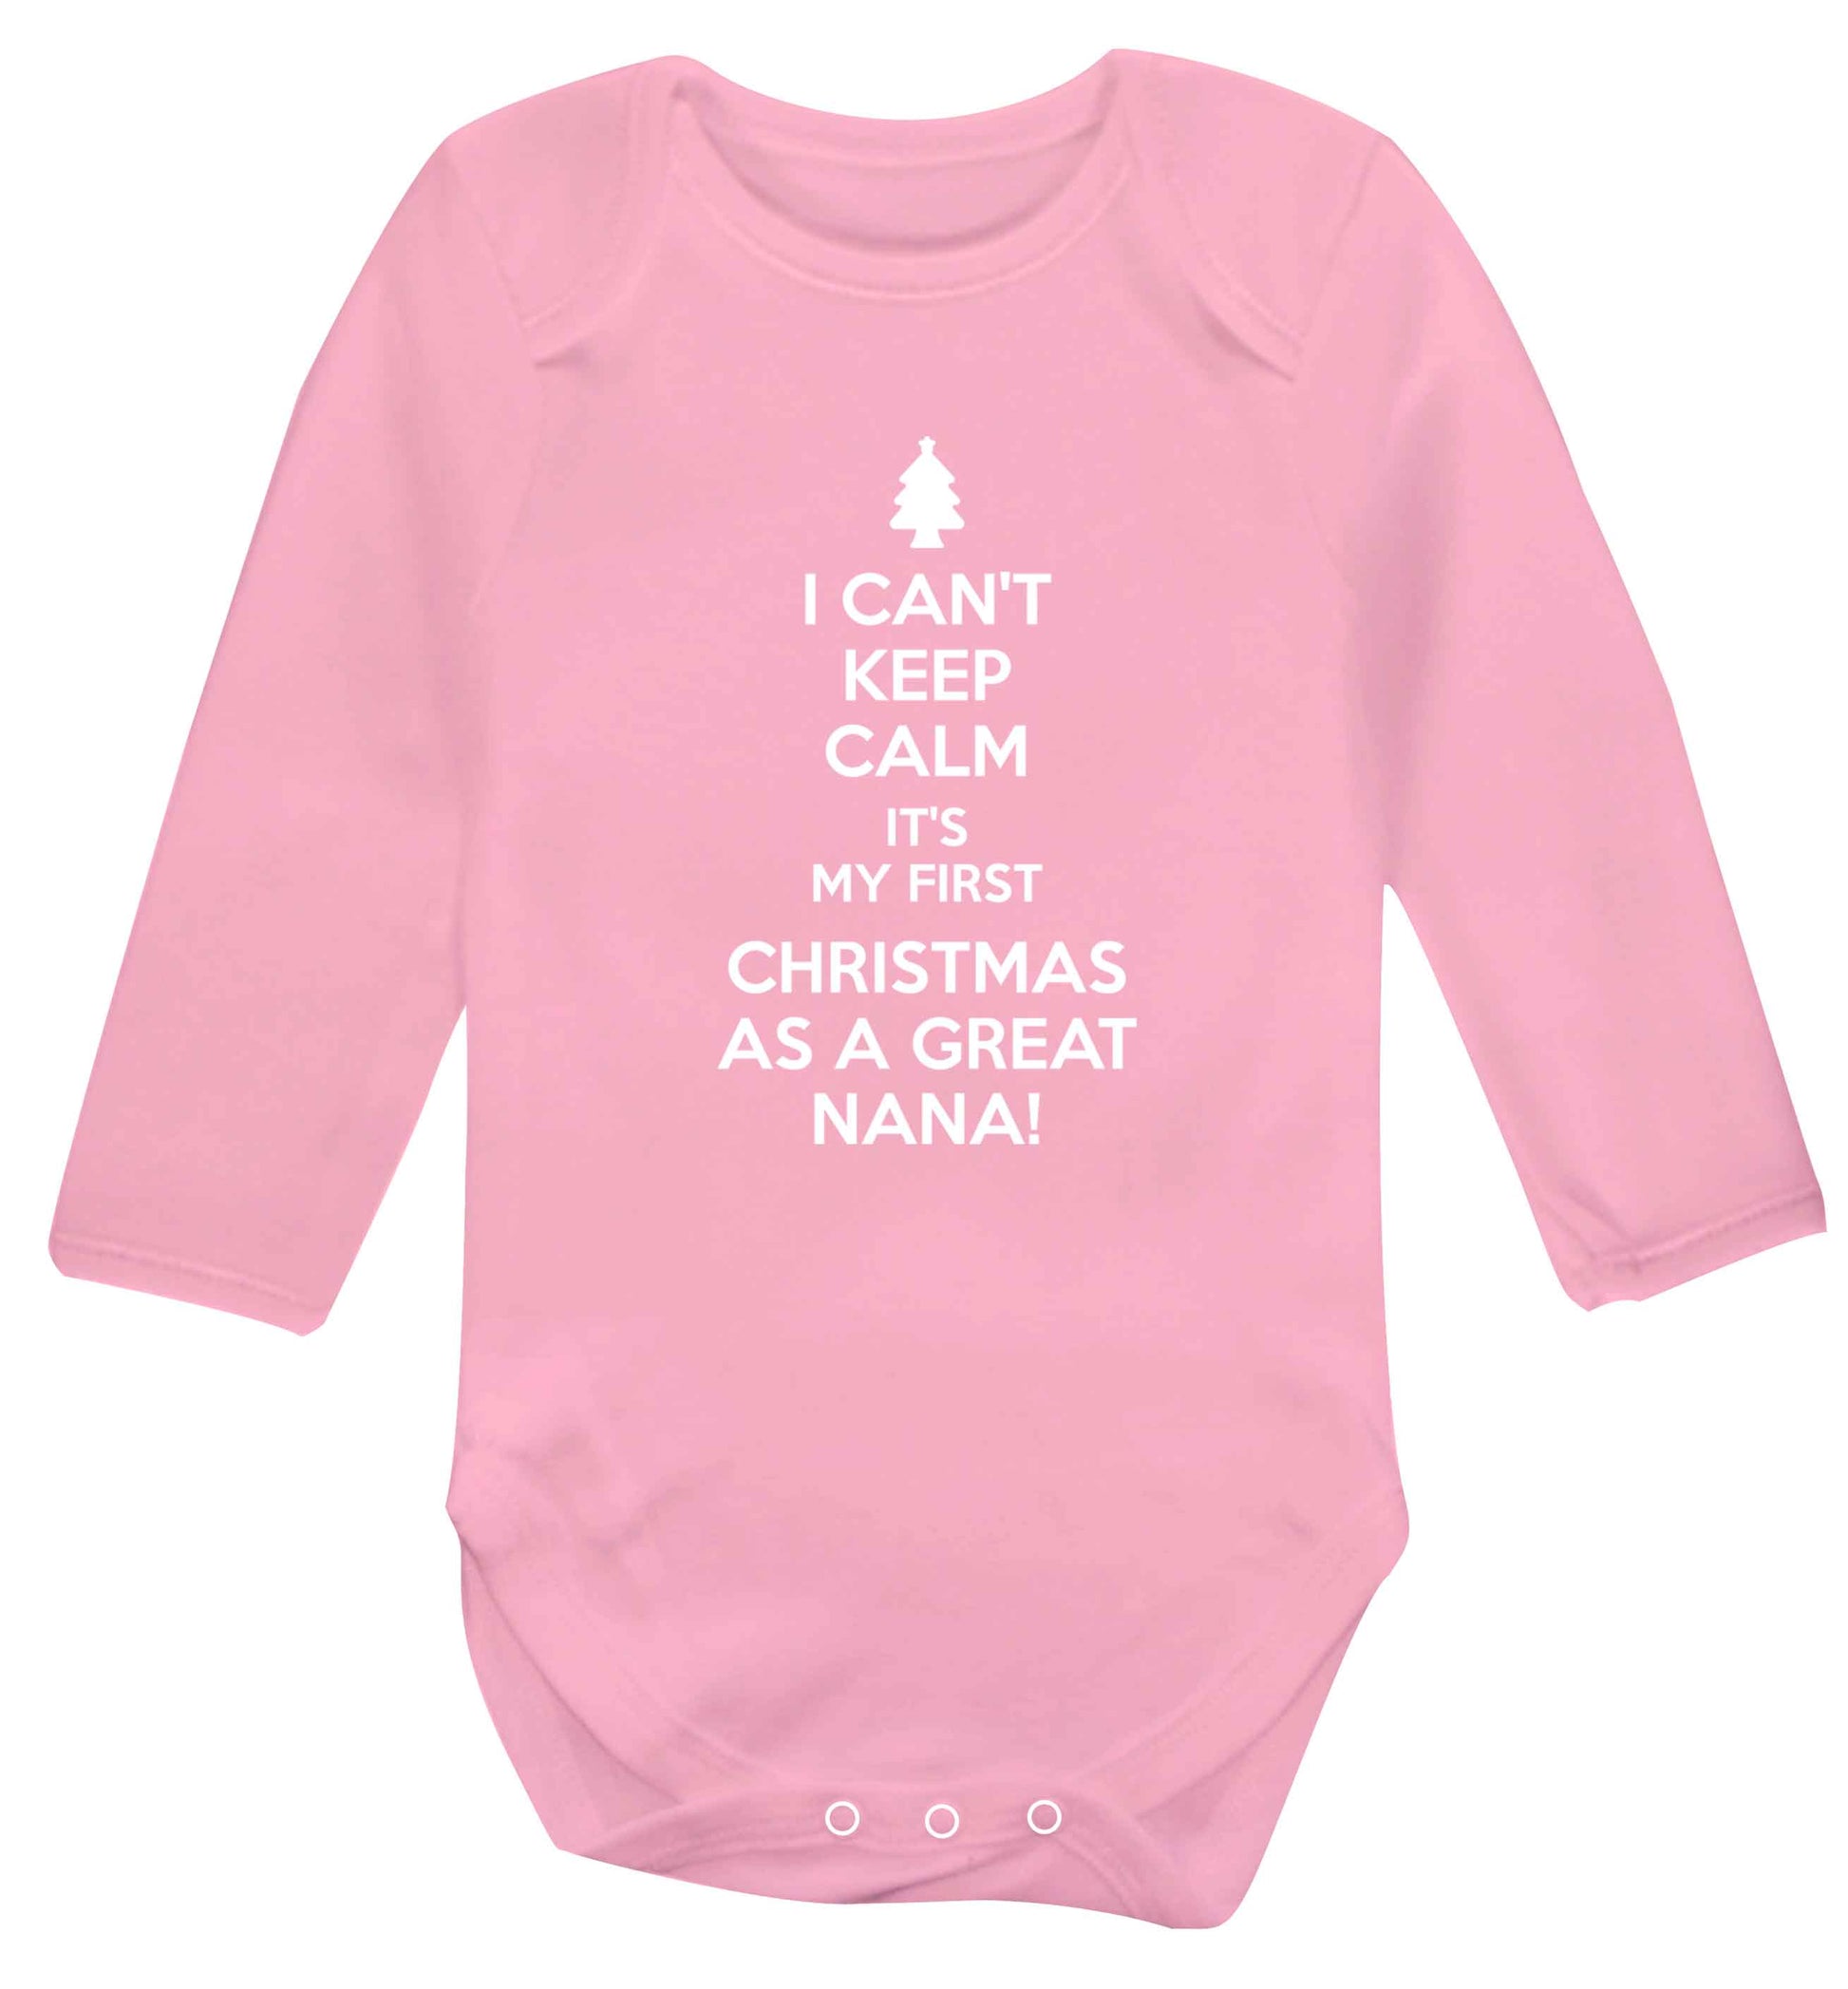 I can't keep calm it's my first Christmas as a great nana! Baby Vest long sleeved pale pink 6-12 months